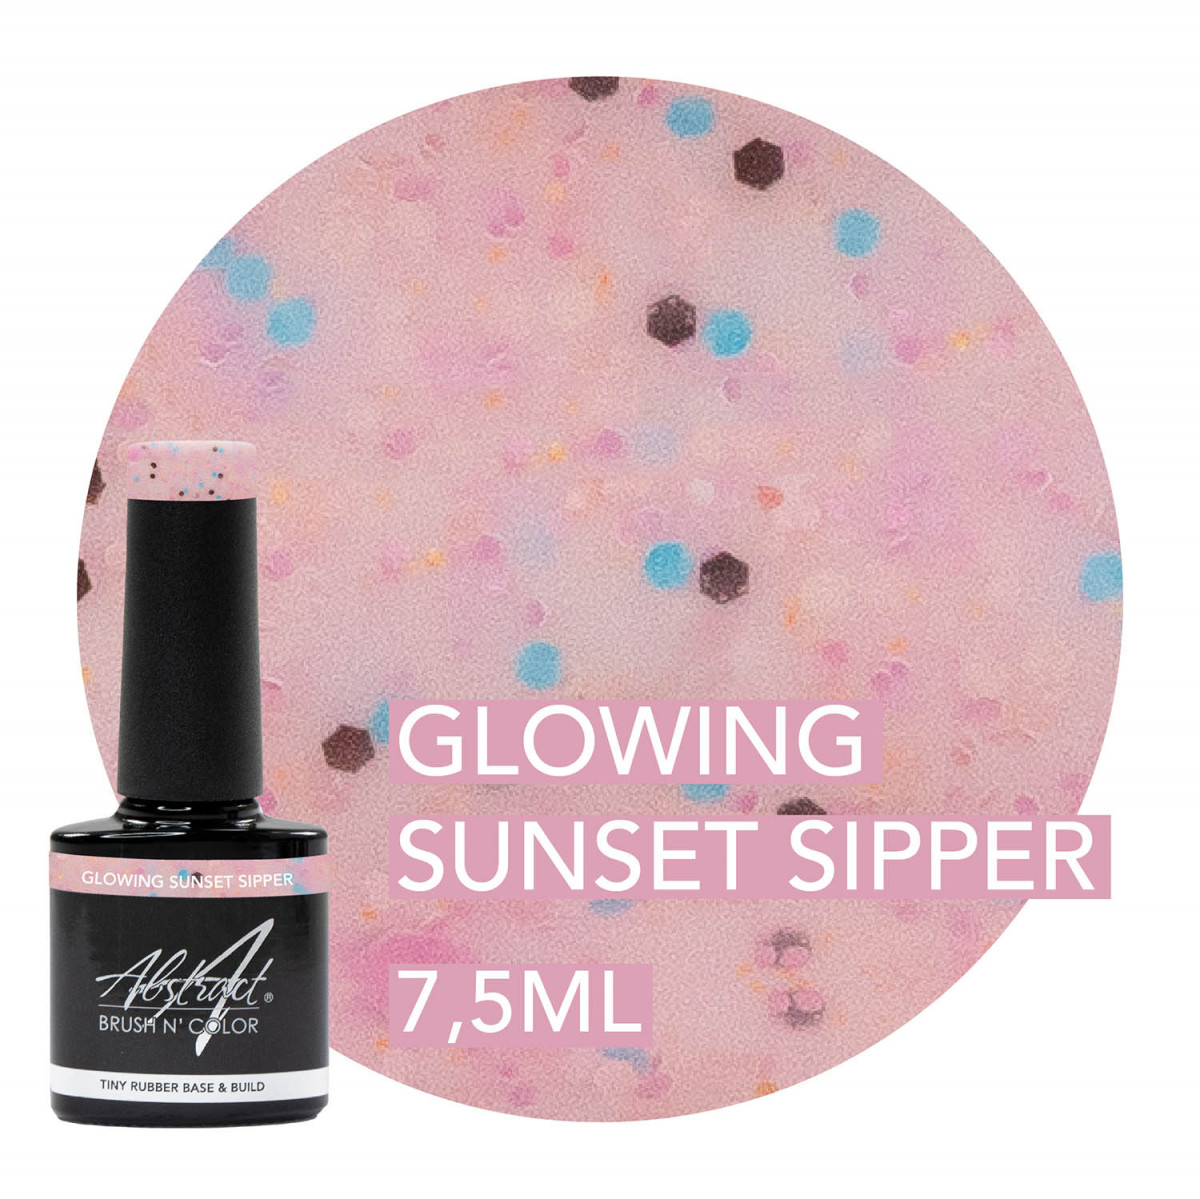 Glowing Sunset Sipper - TINY Rubber Base & Build Gel Abstract